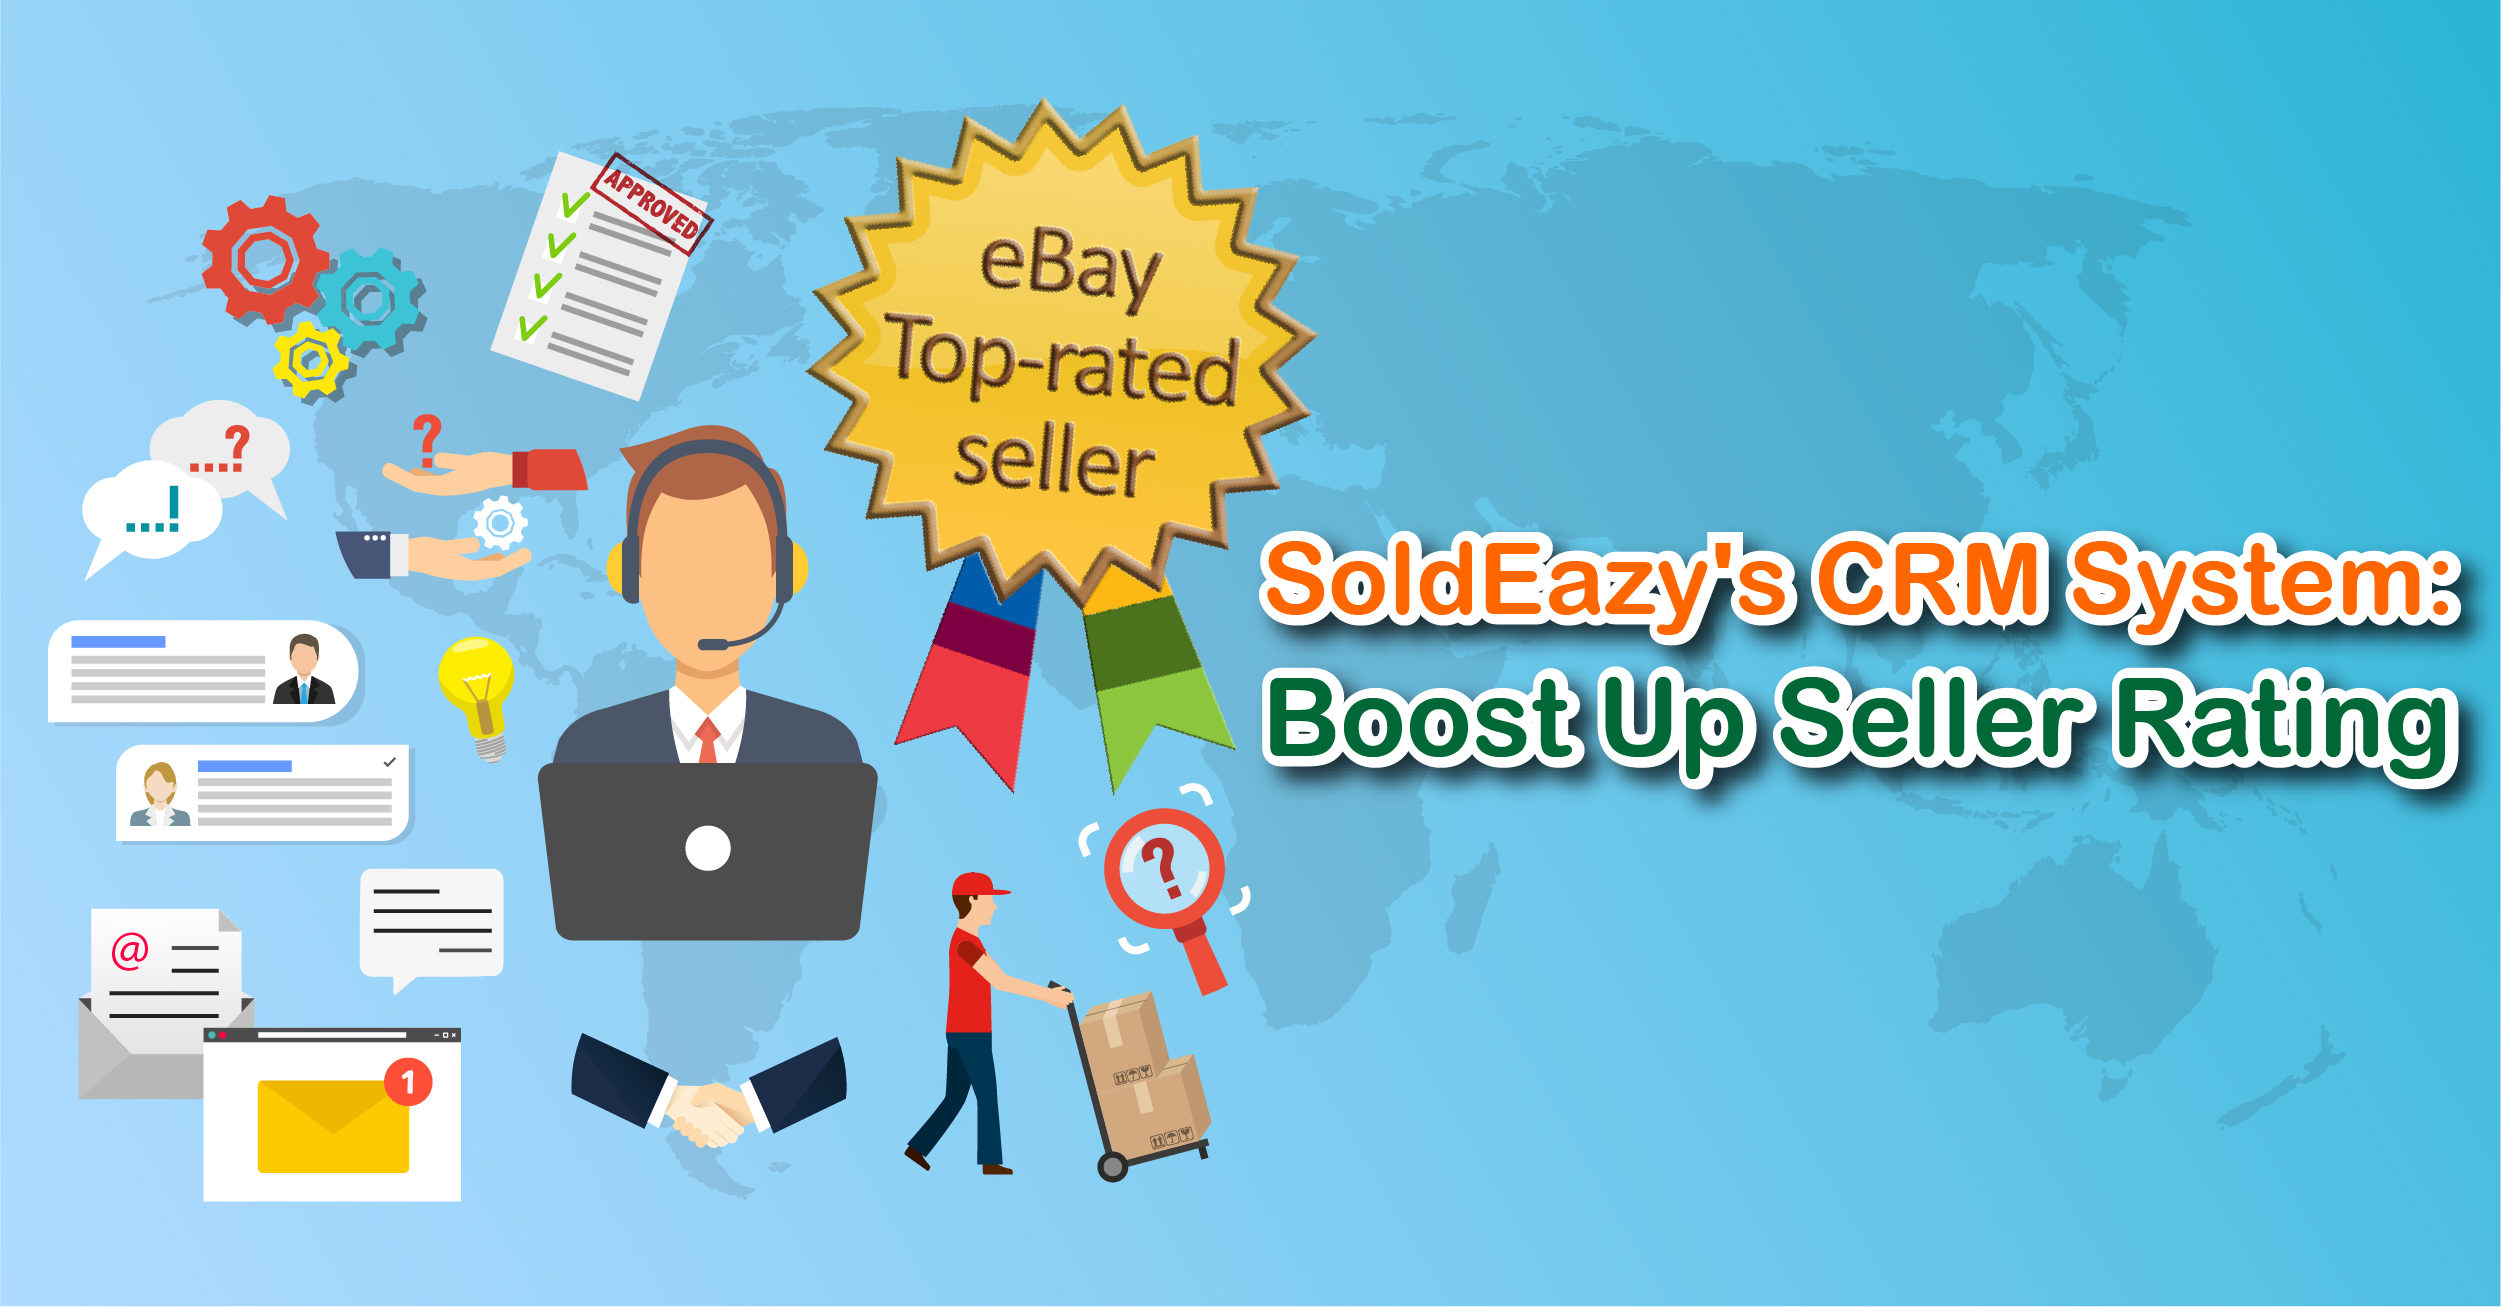 How To Get The  Best Seller Badge -  Seller Tips